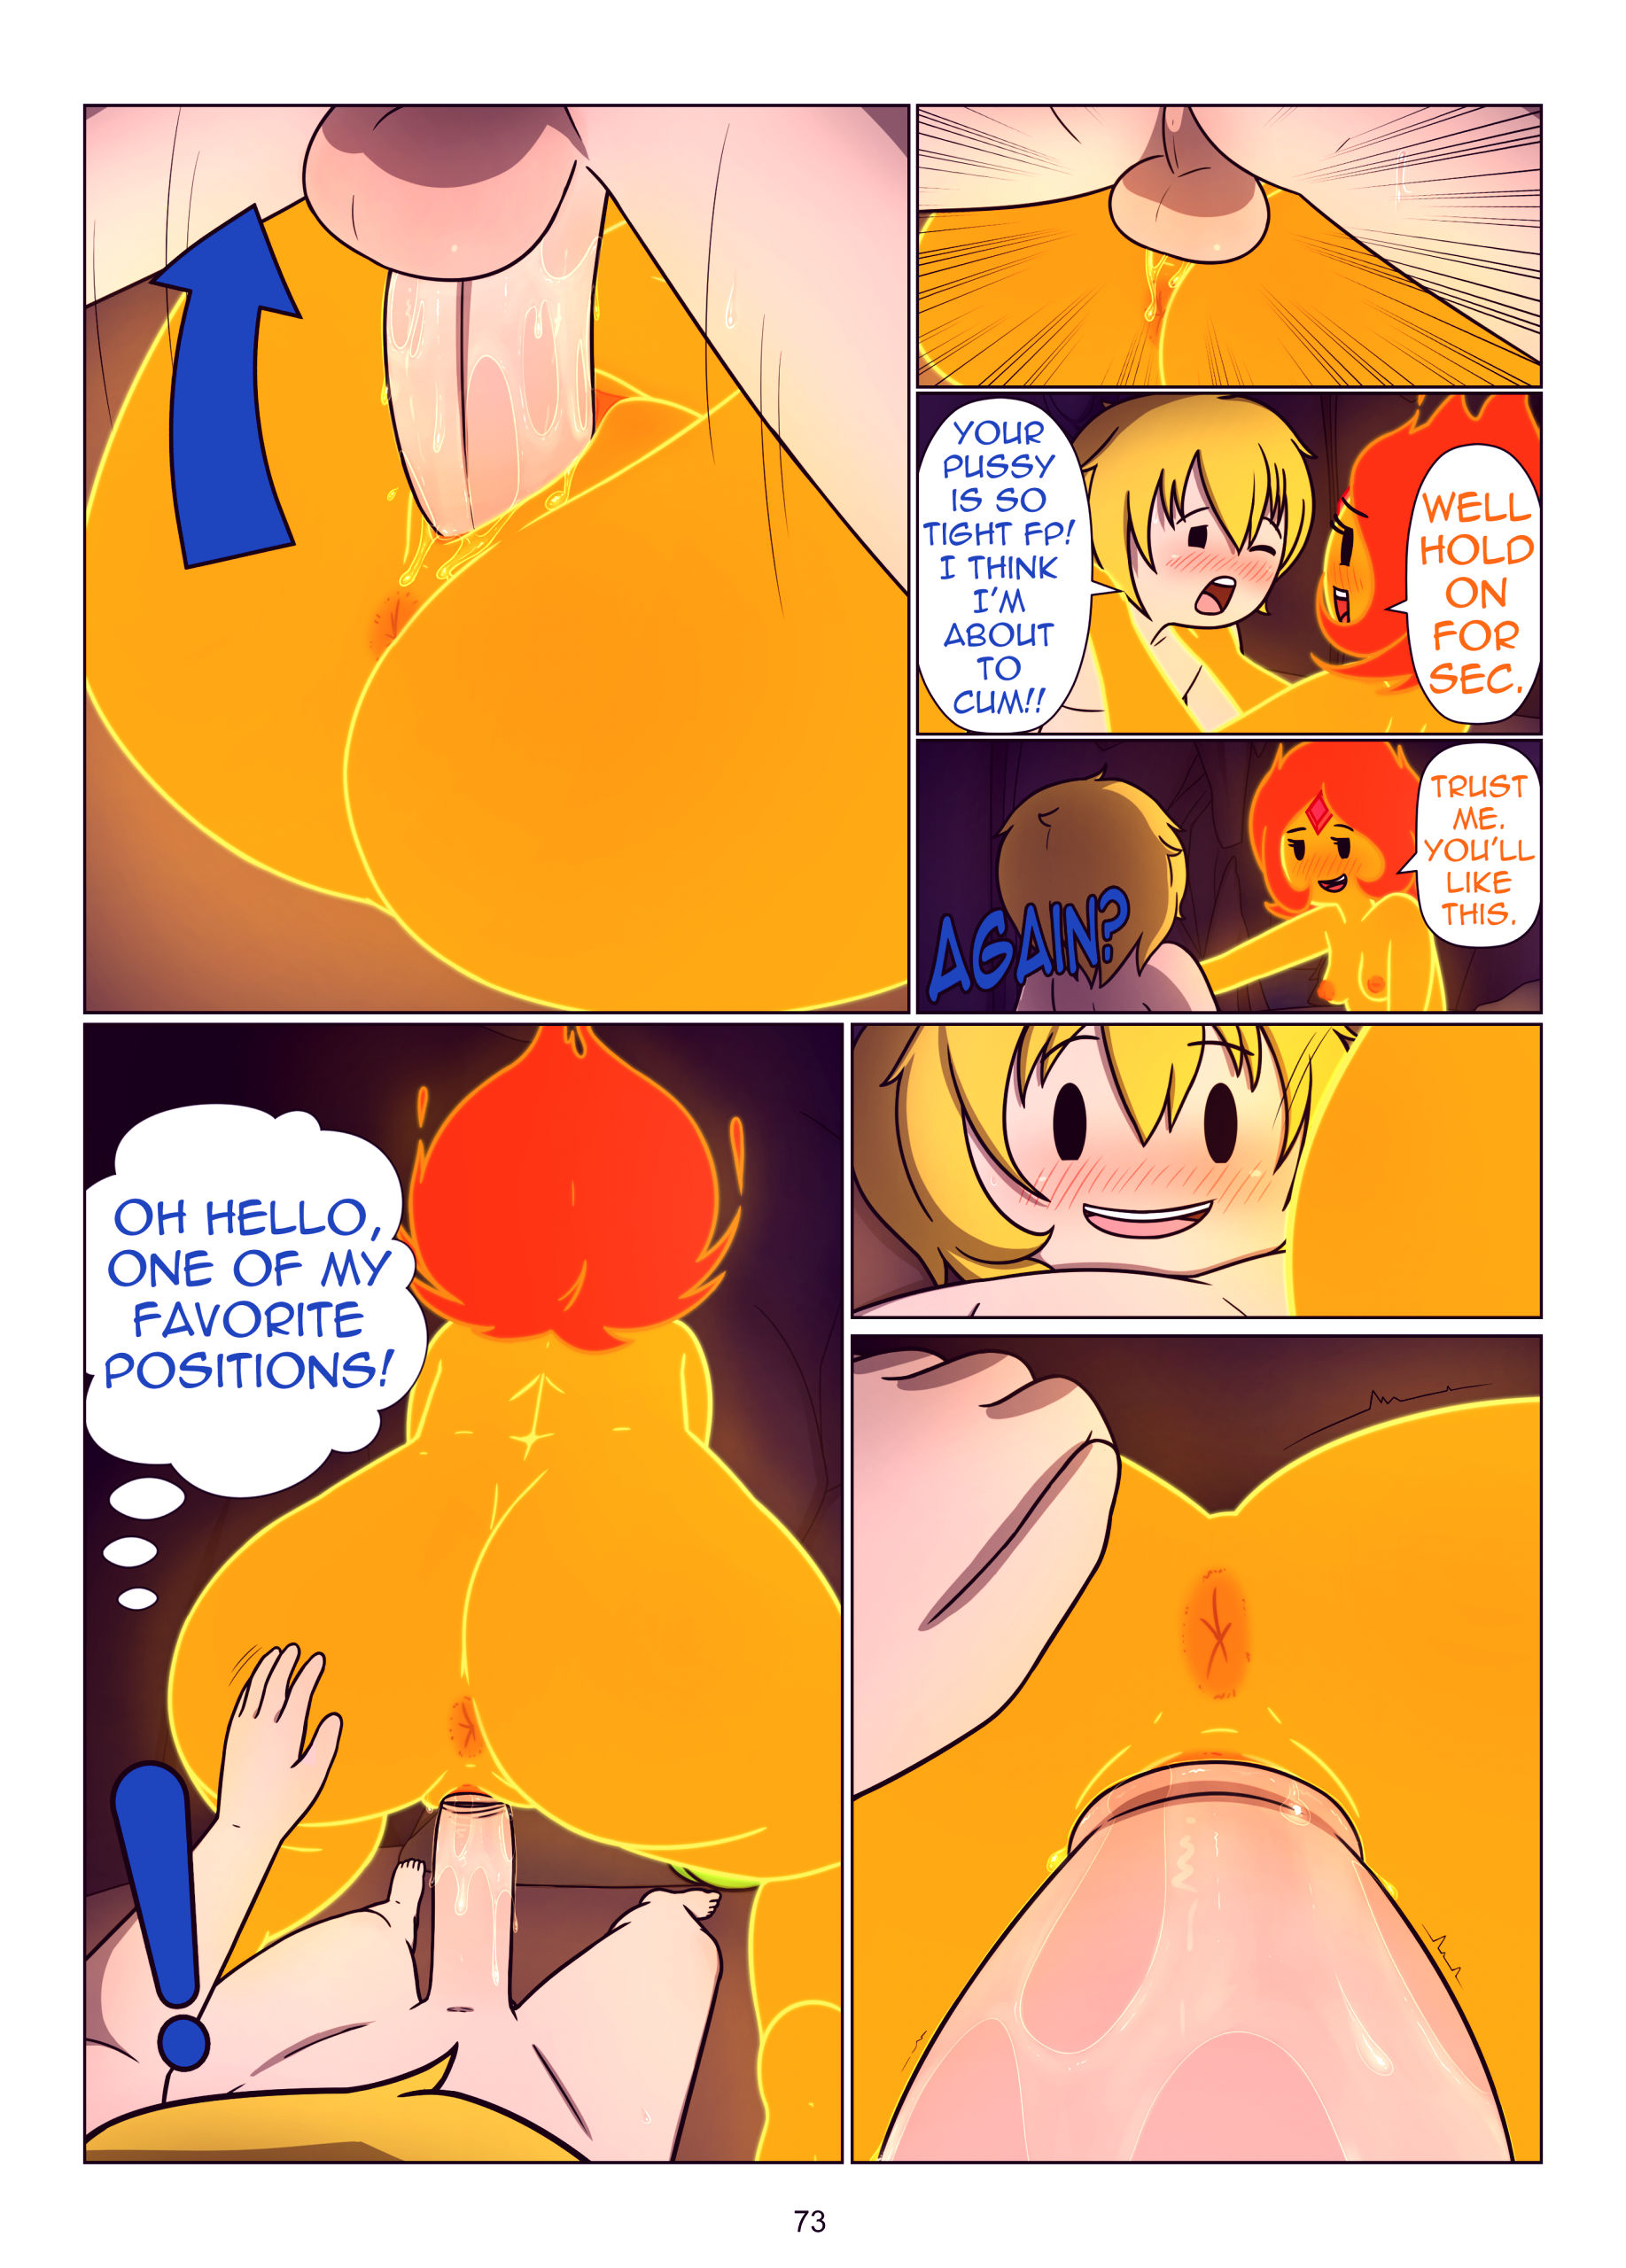 Misadventure time the collection porn comic picture 74